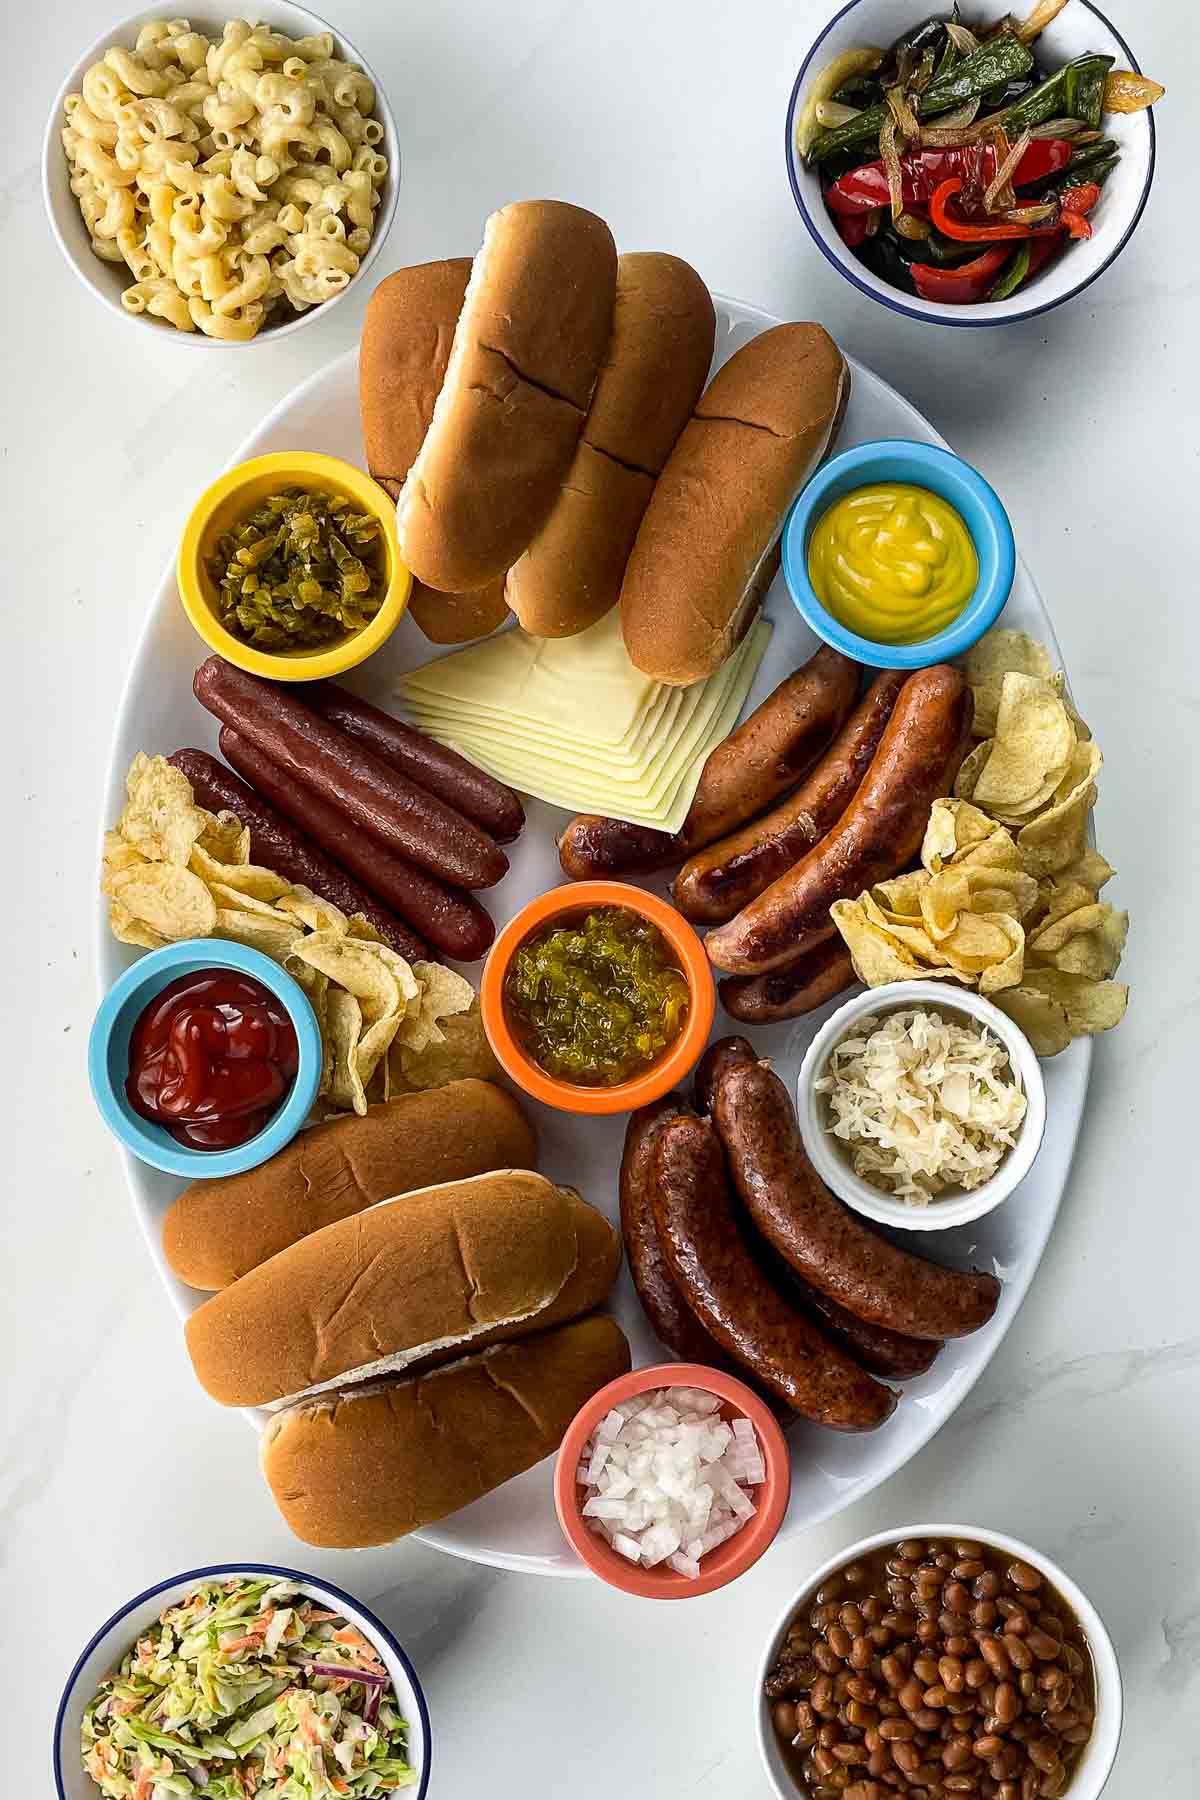 hot dog bar ingredients on bowls and on a platter